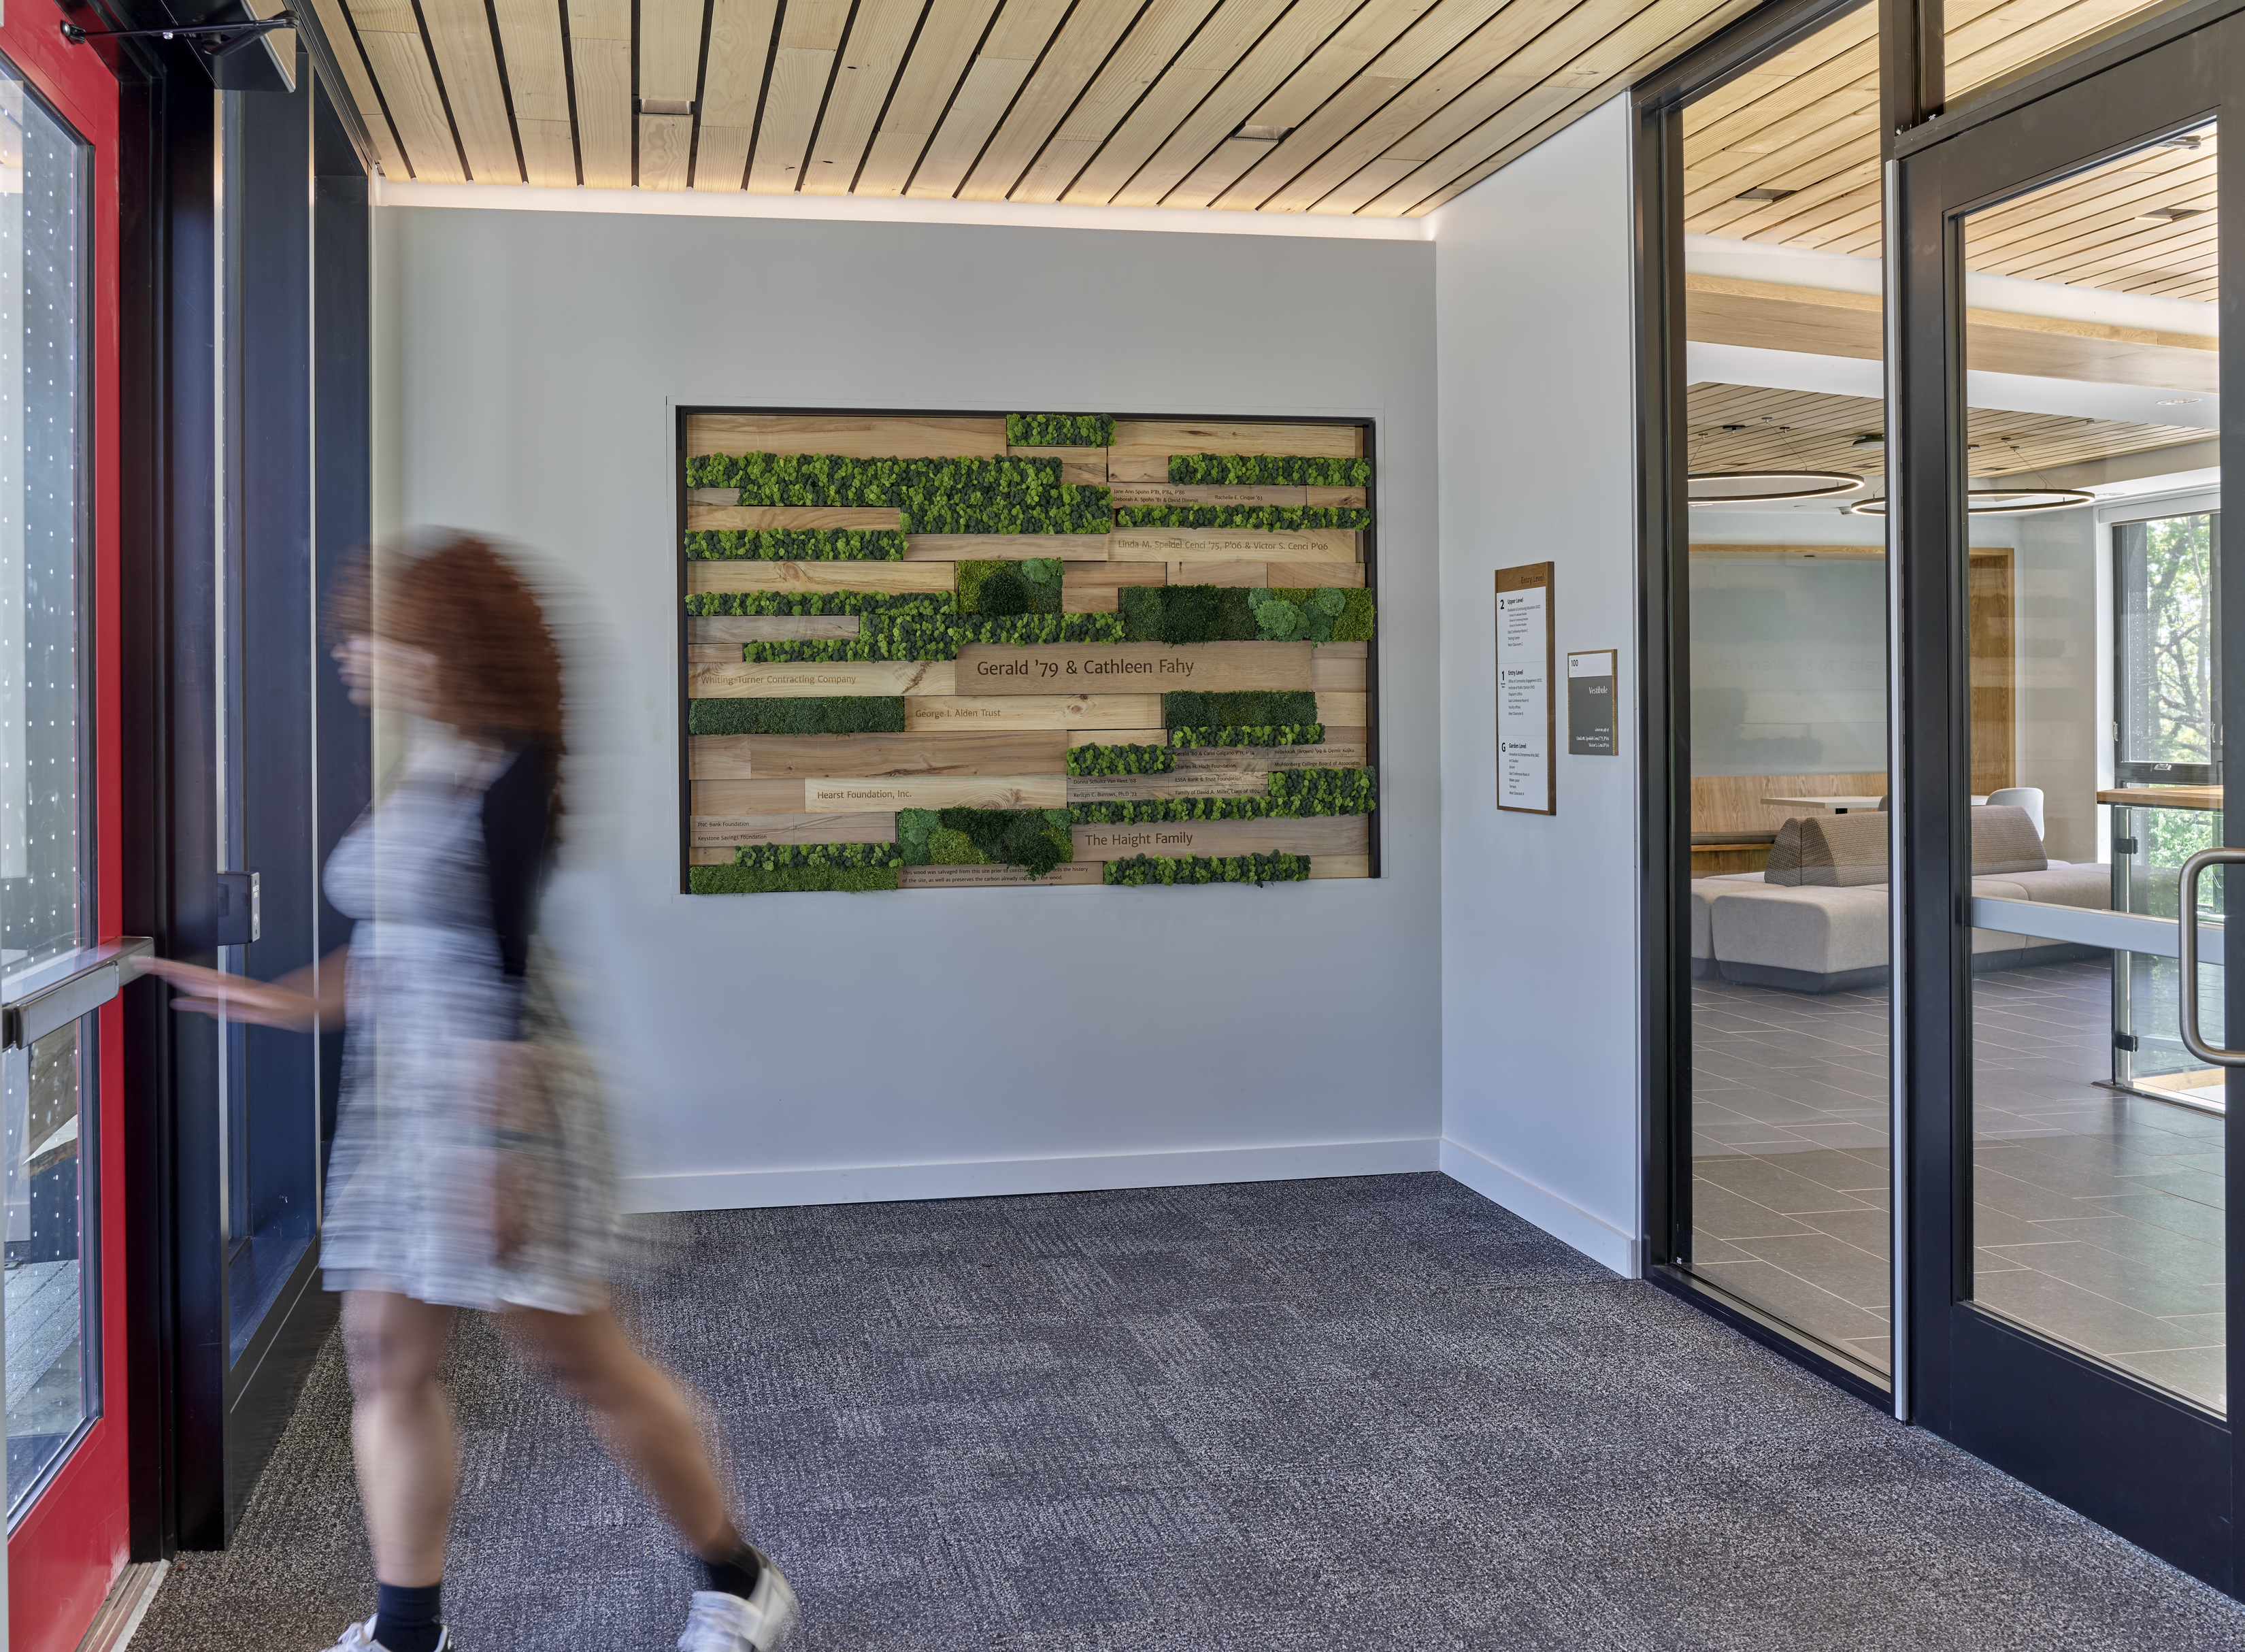 Interface SR999 carpet tile in entryway of college building with living wall